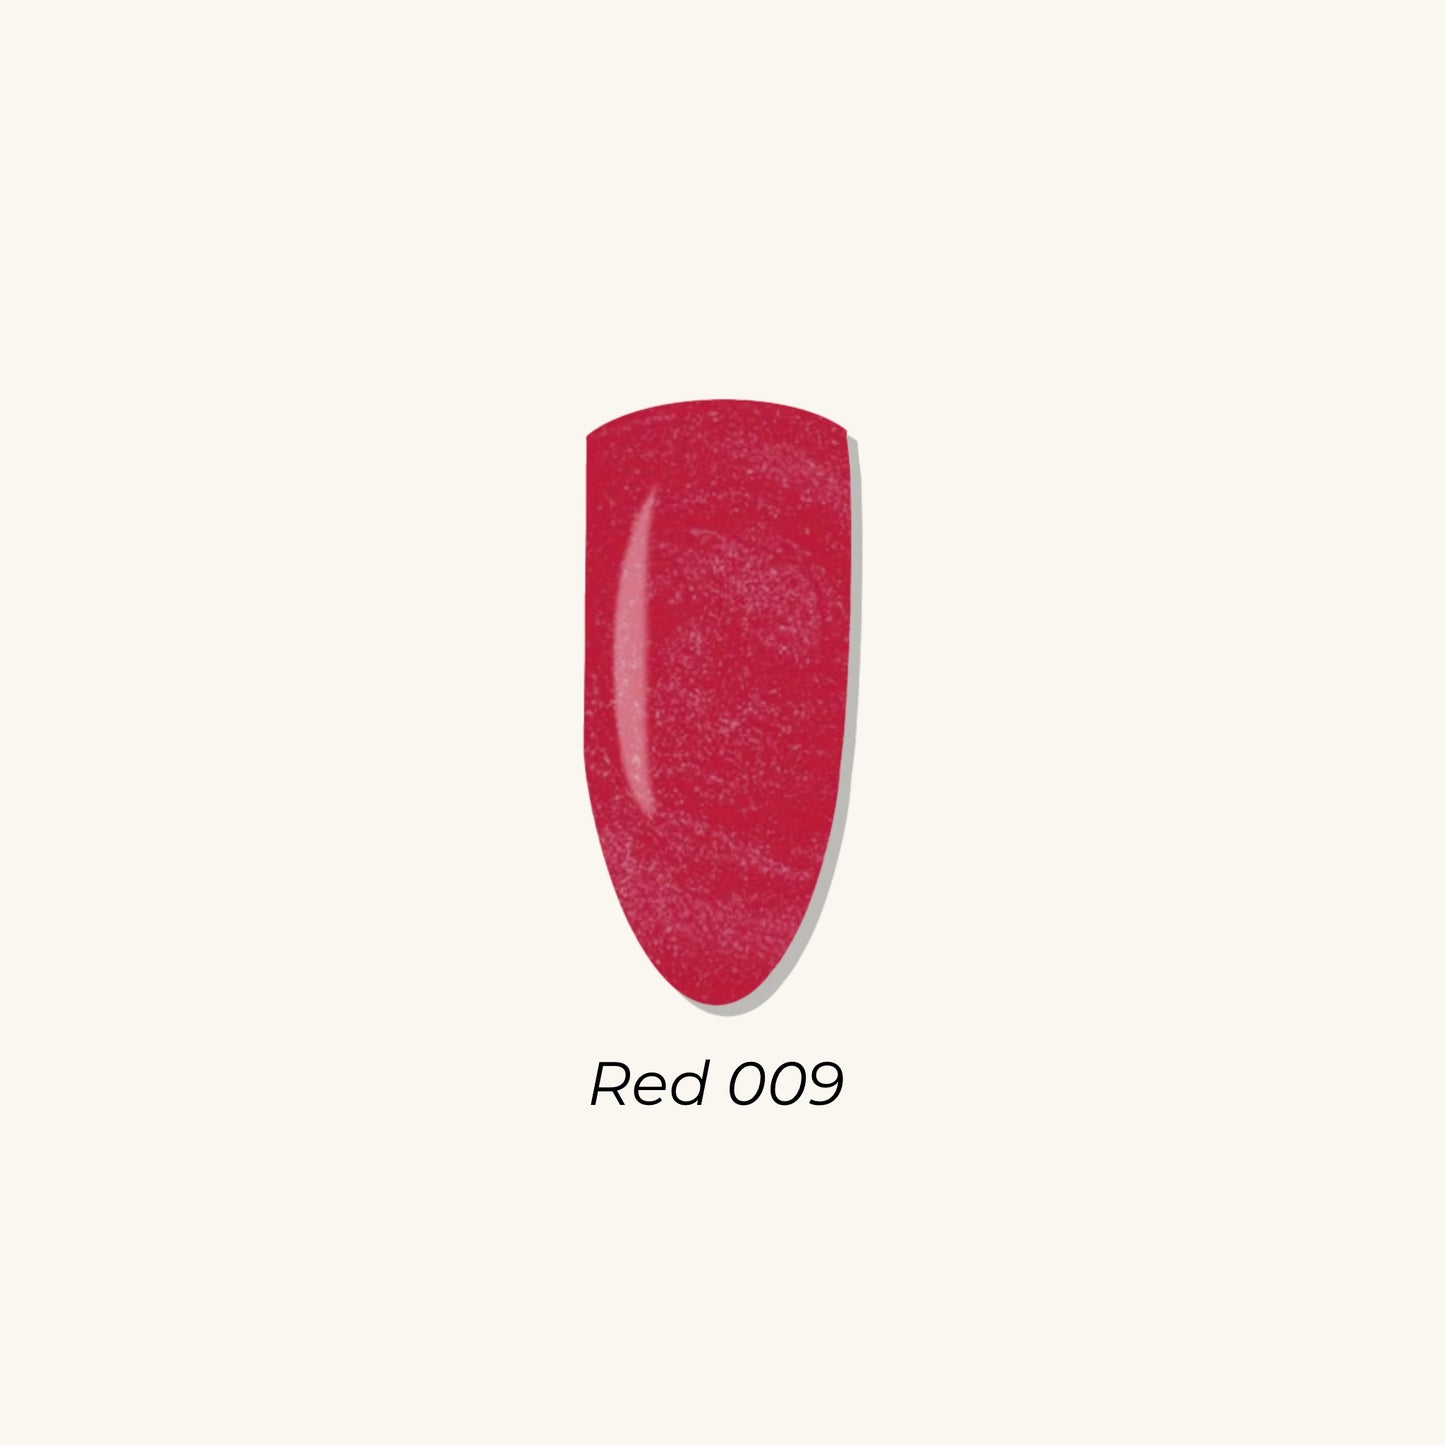 Red 009